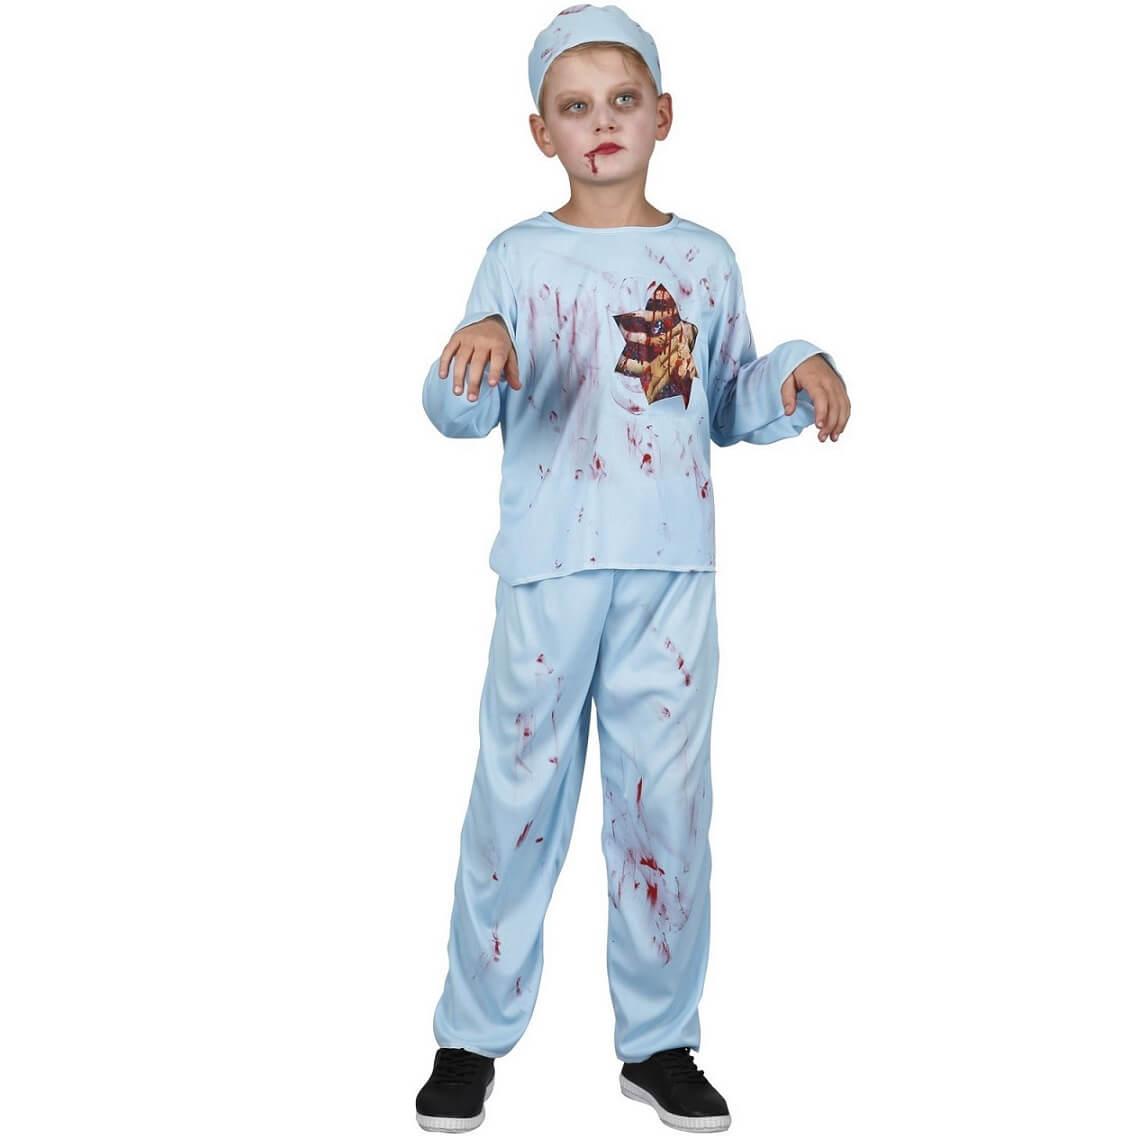 Costume enfant halloween chirurgien sanglant taille 10 a 12 ans